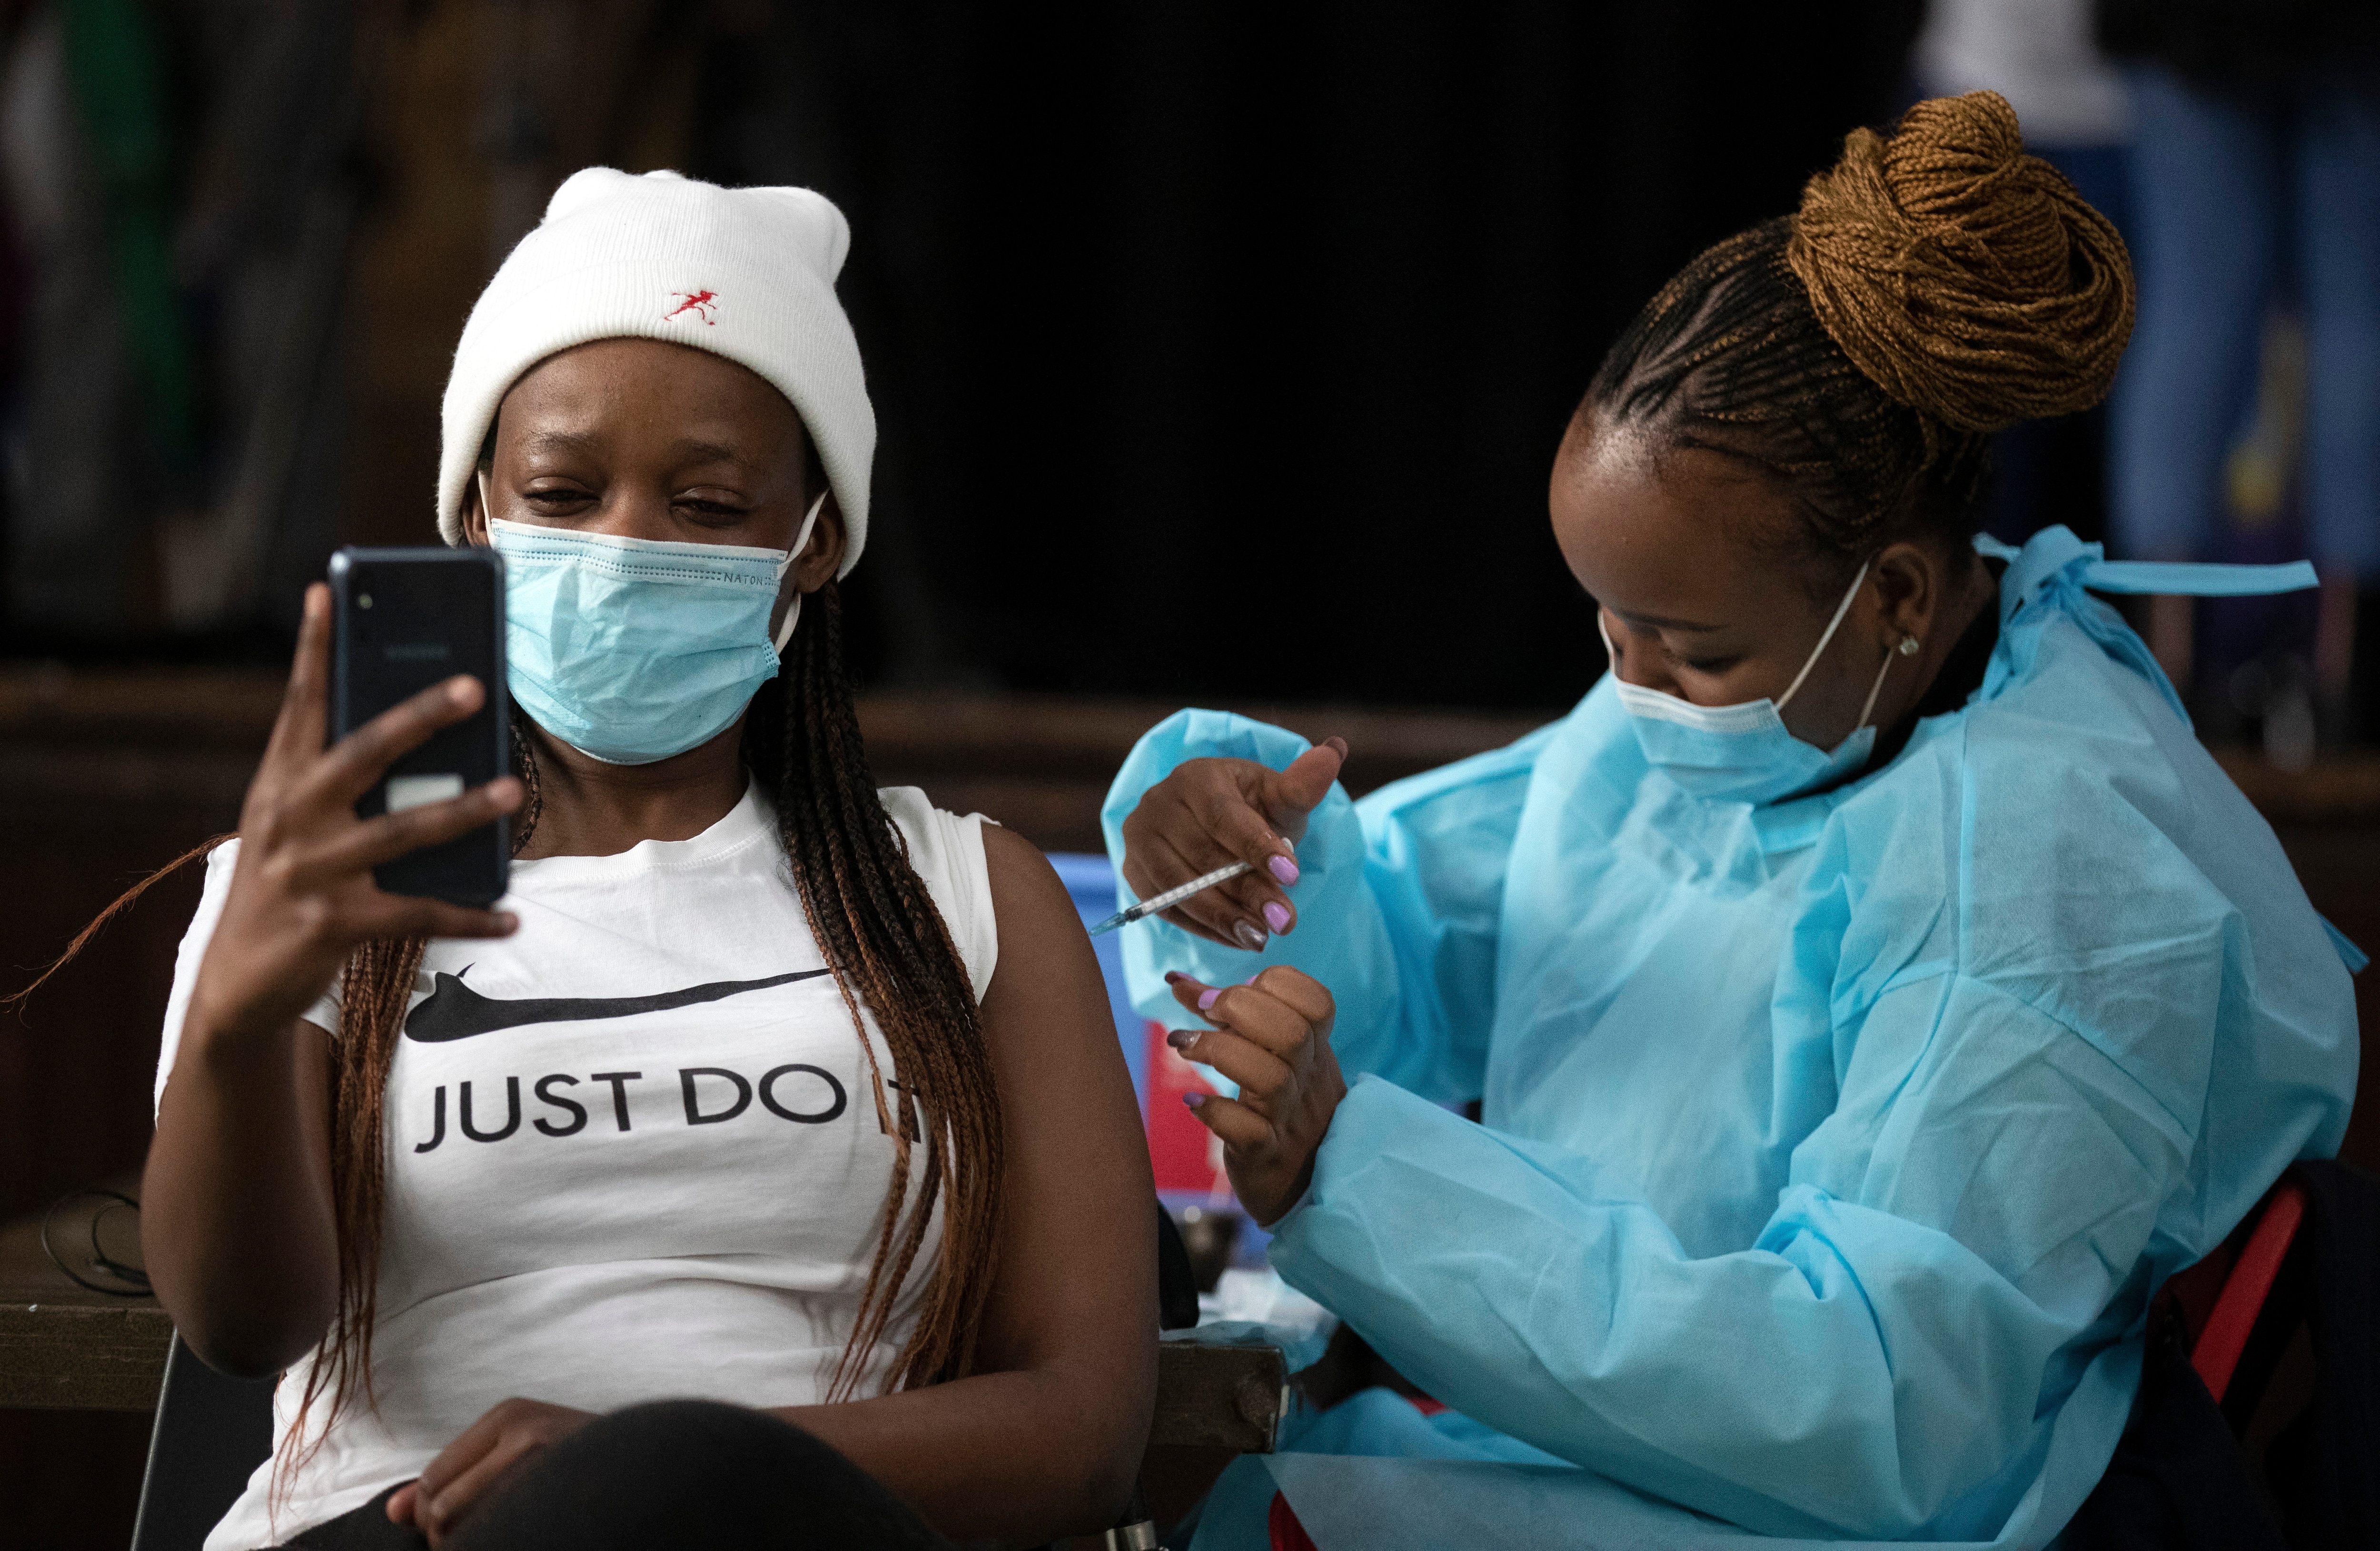 A healthcare worker administers the Pfizer COVID-19 vaccine to a woman in Katlehong, east of Johannesburg, South Africa.